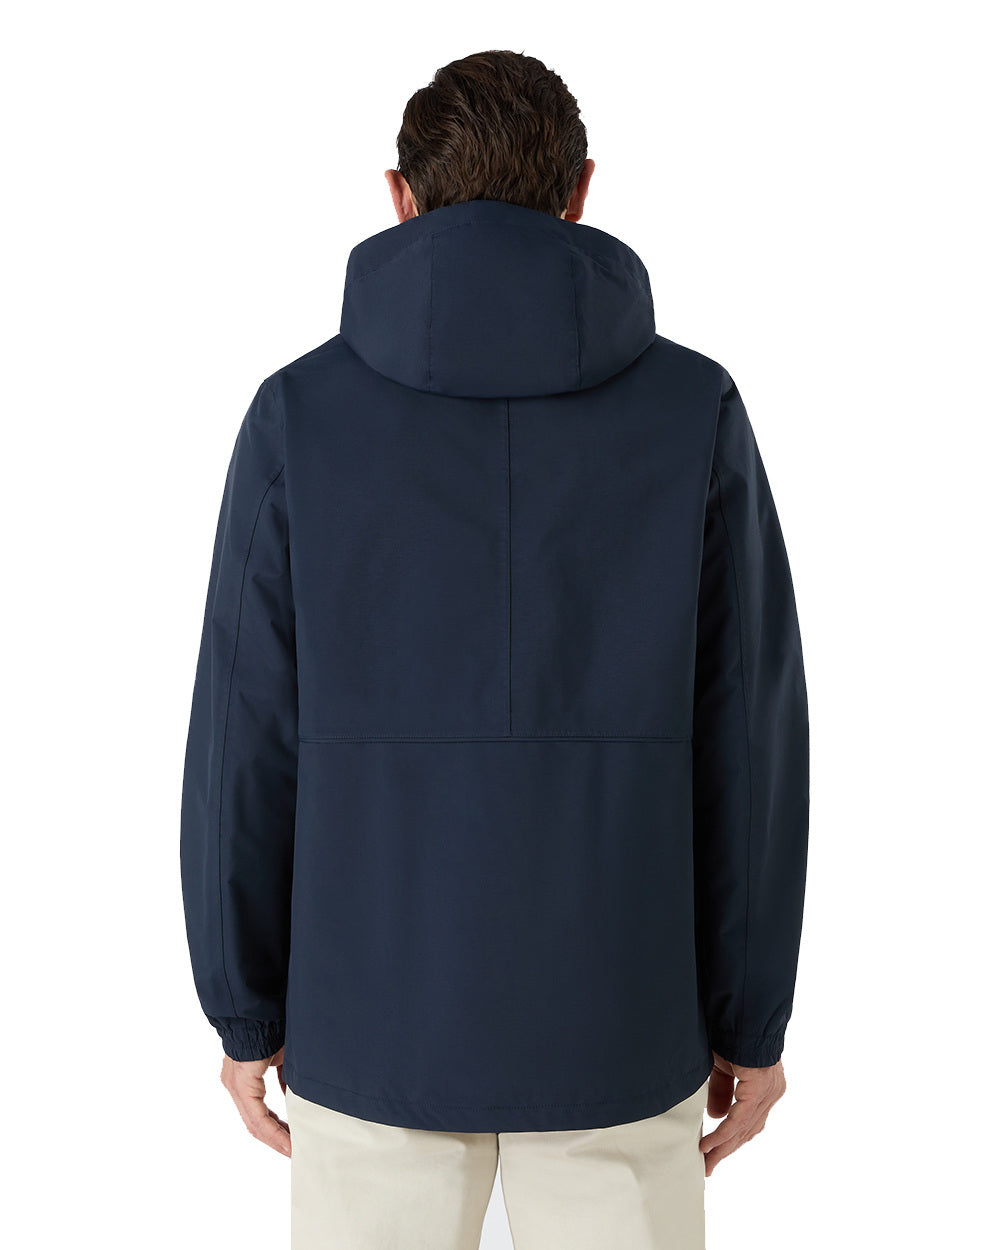 Navy Coloured Musto Mens Classic Shore Waterproof Jacket On A White Background 